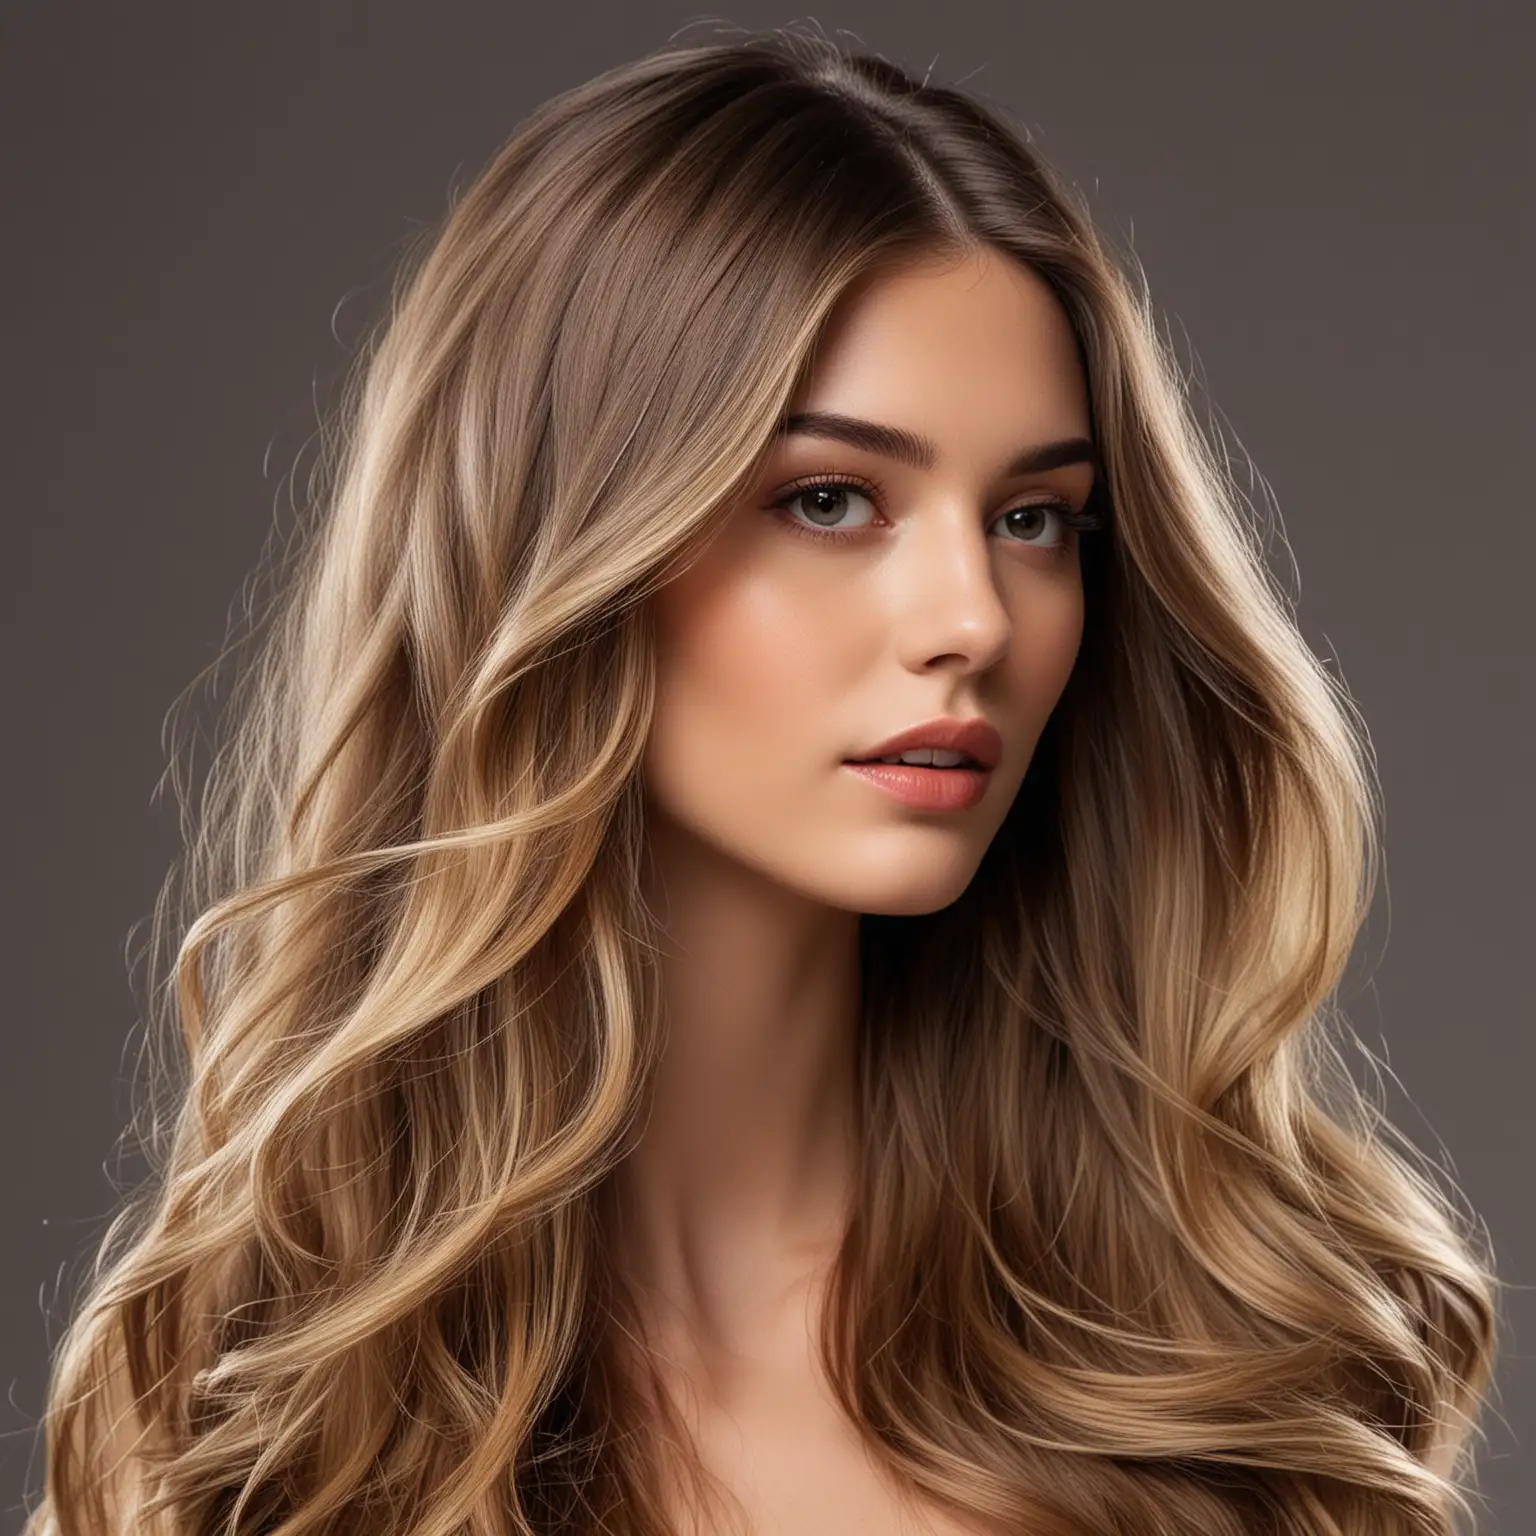 Spectacular Long Balayage Hair on Perfil Model Stunning Hair Color Style